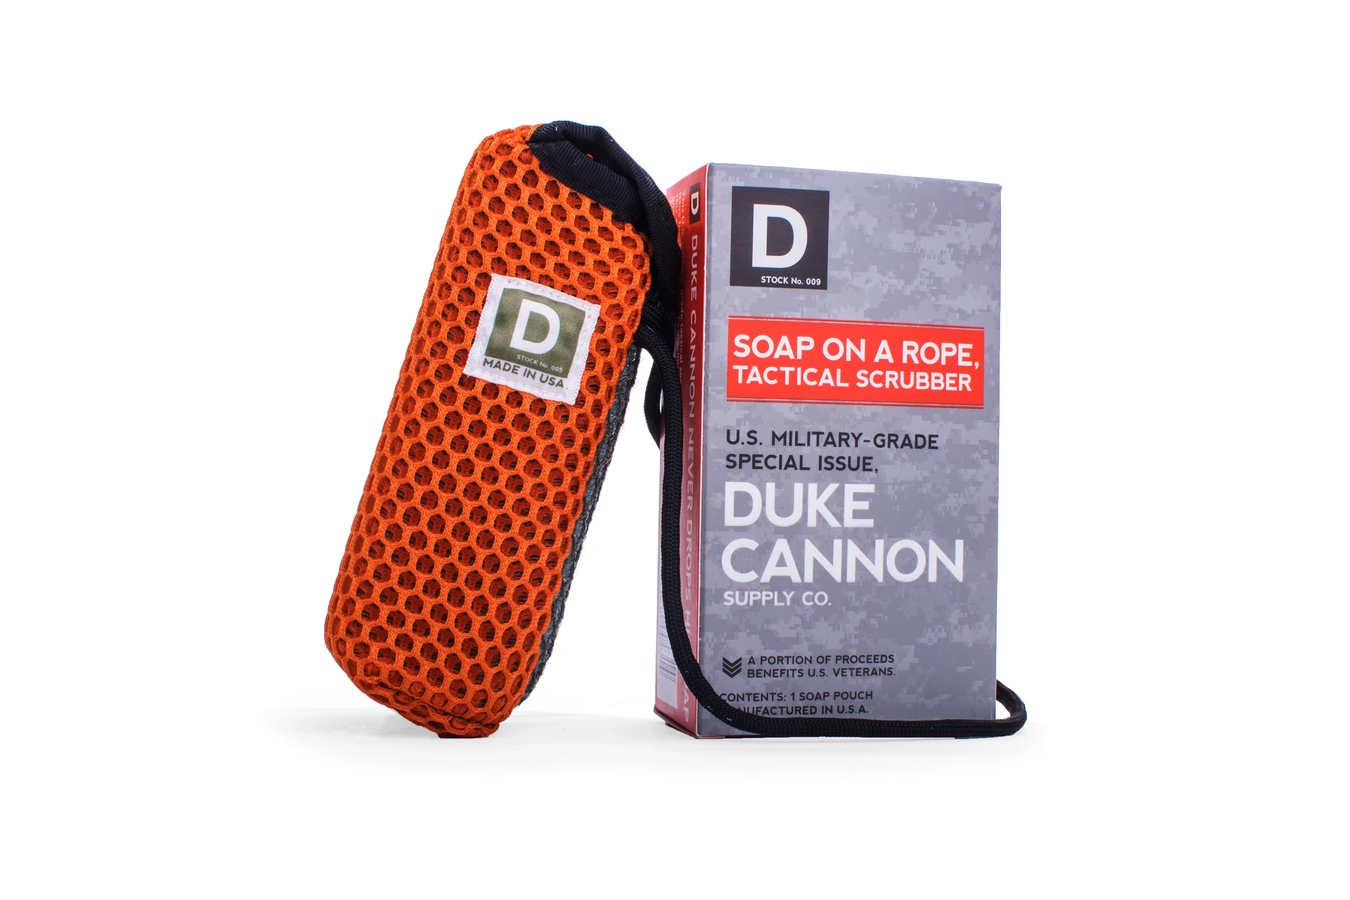 DUKE CANNON SOAP ON A ROPE TACTICAL SCRUBBER